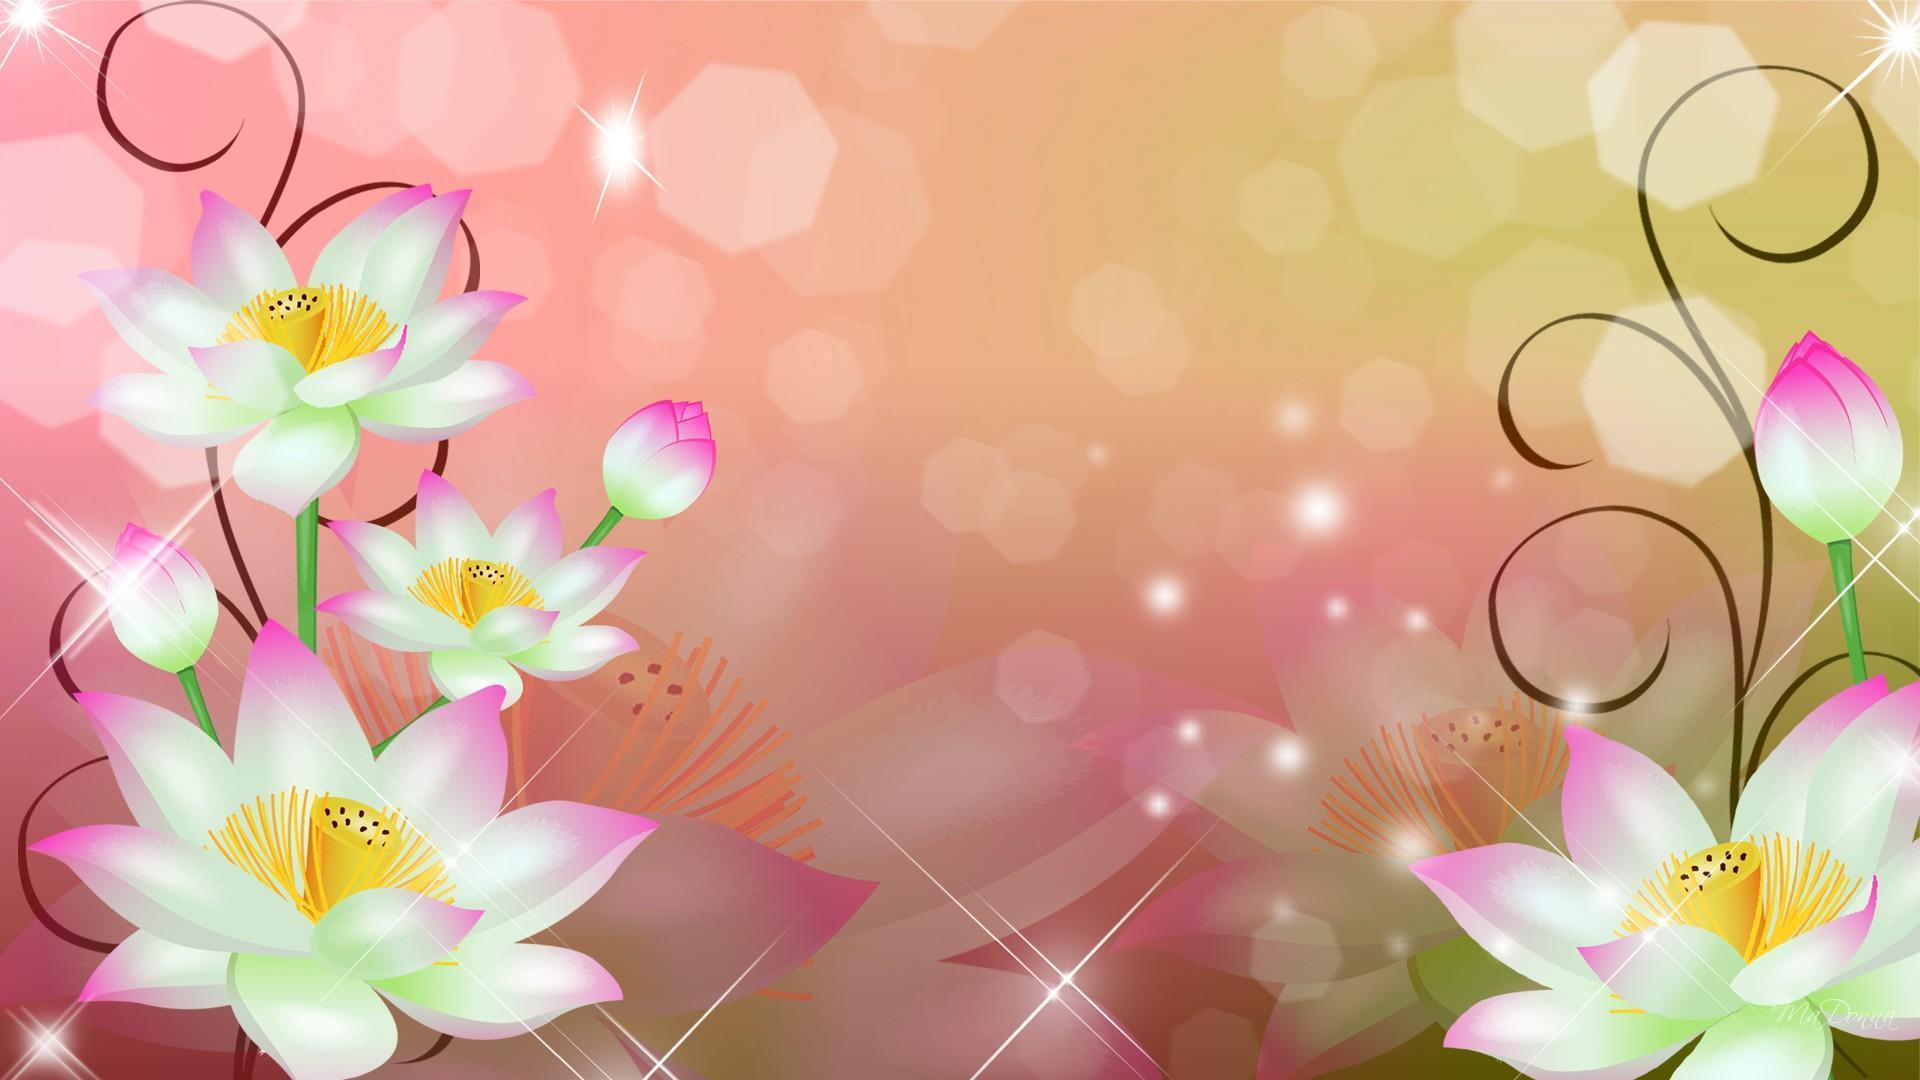 Wallpapers Of Flowers 1920x1080